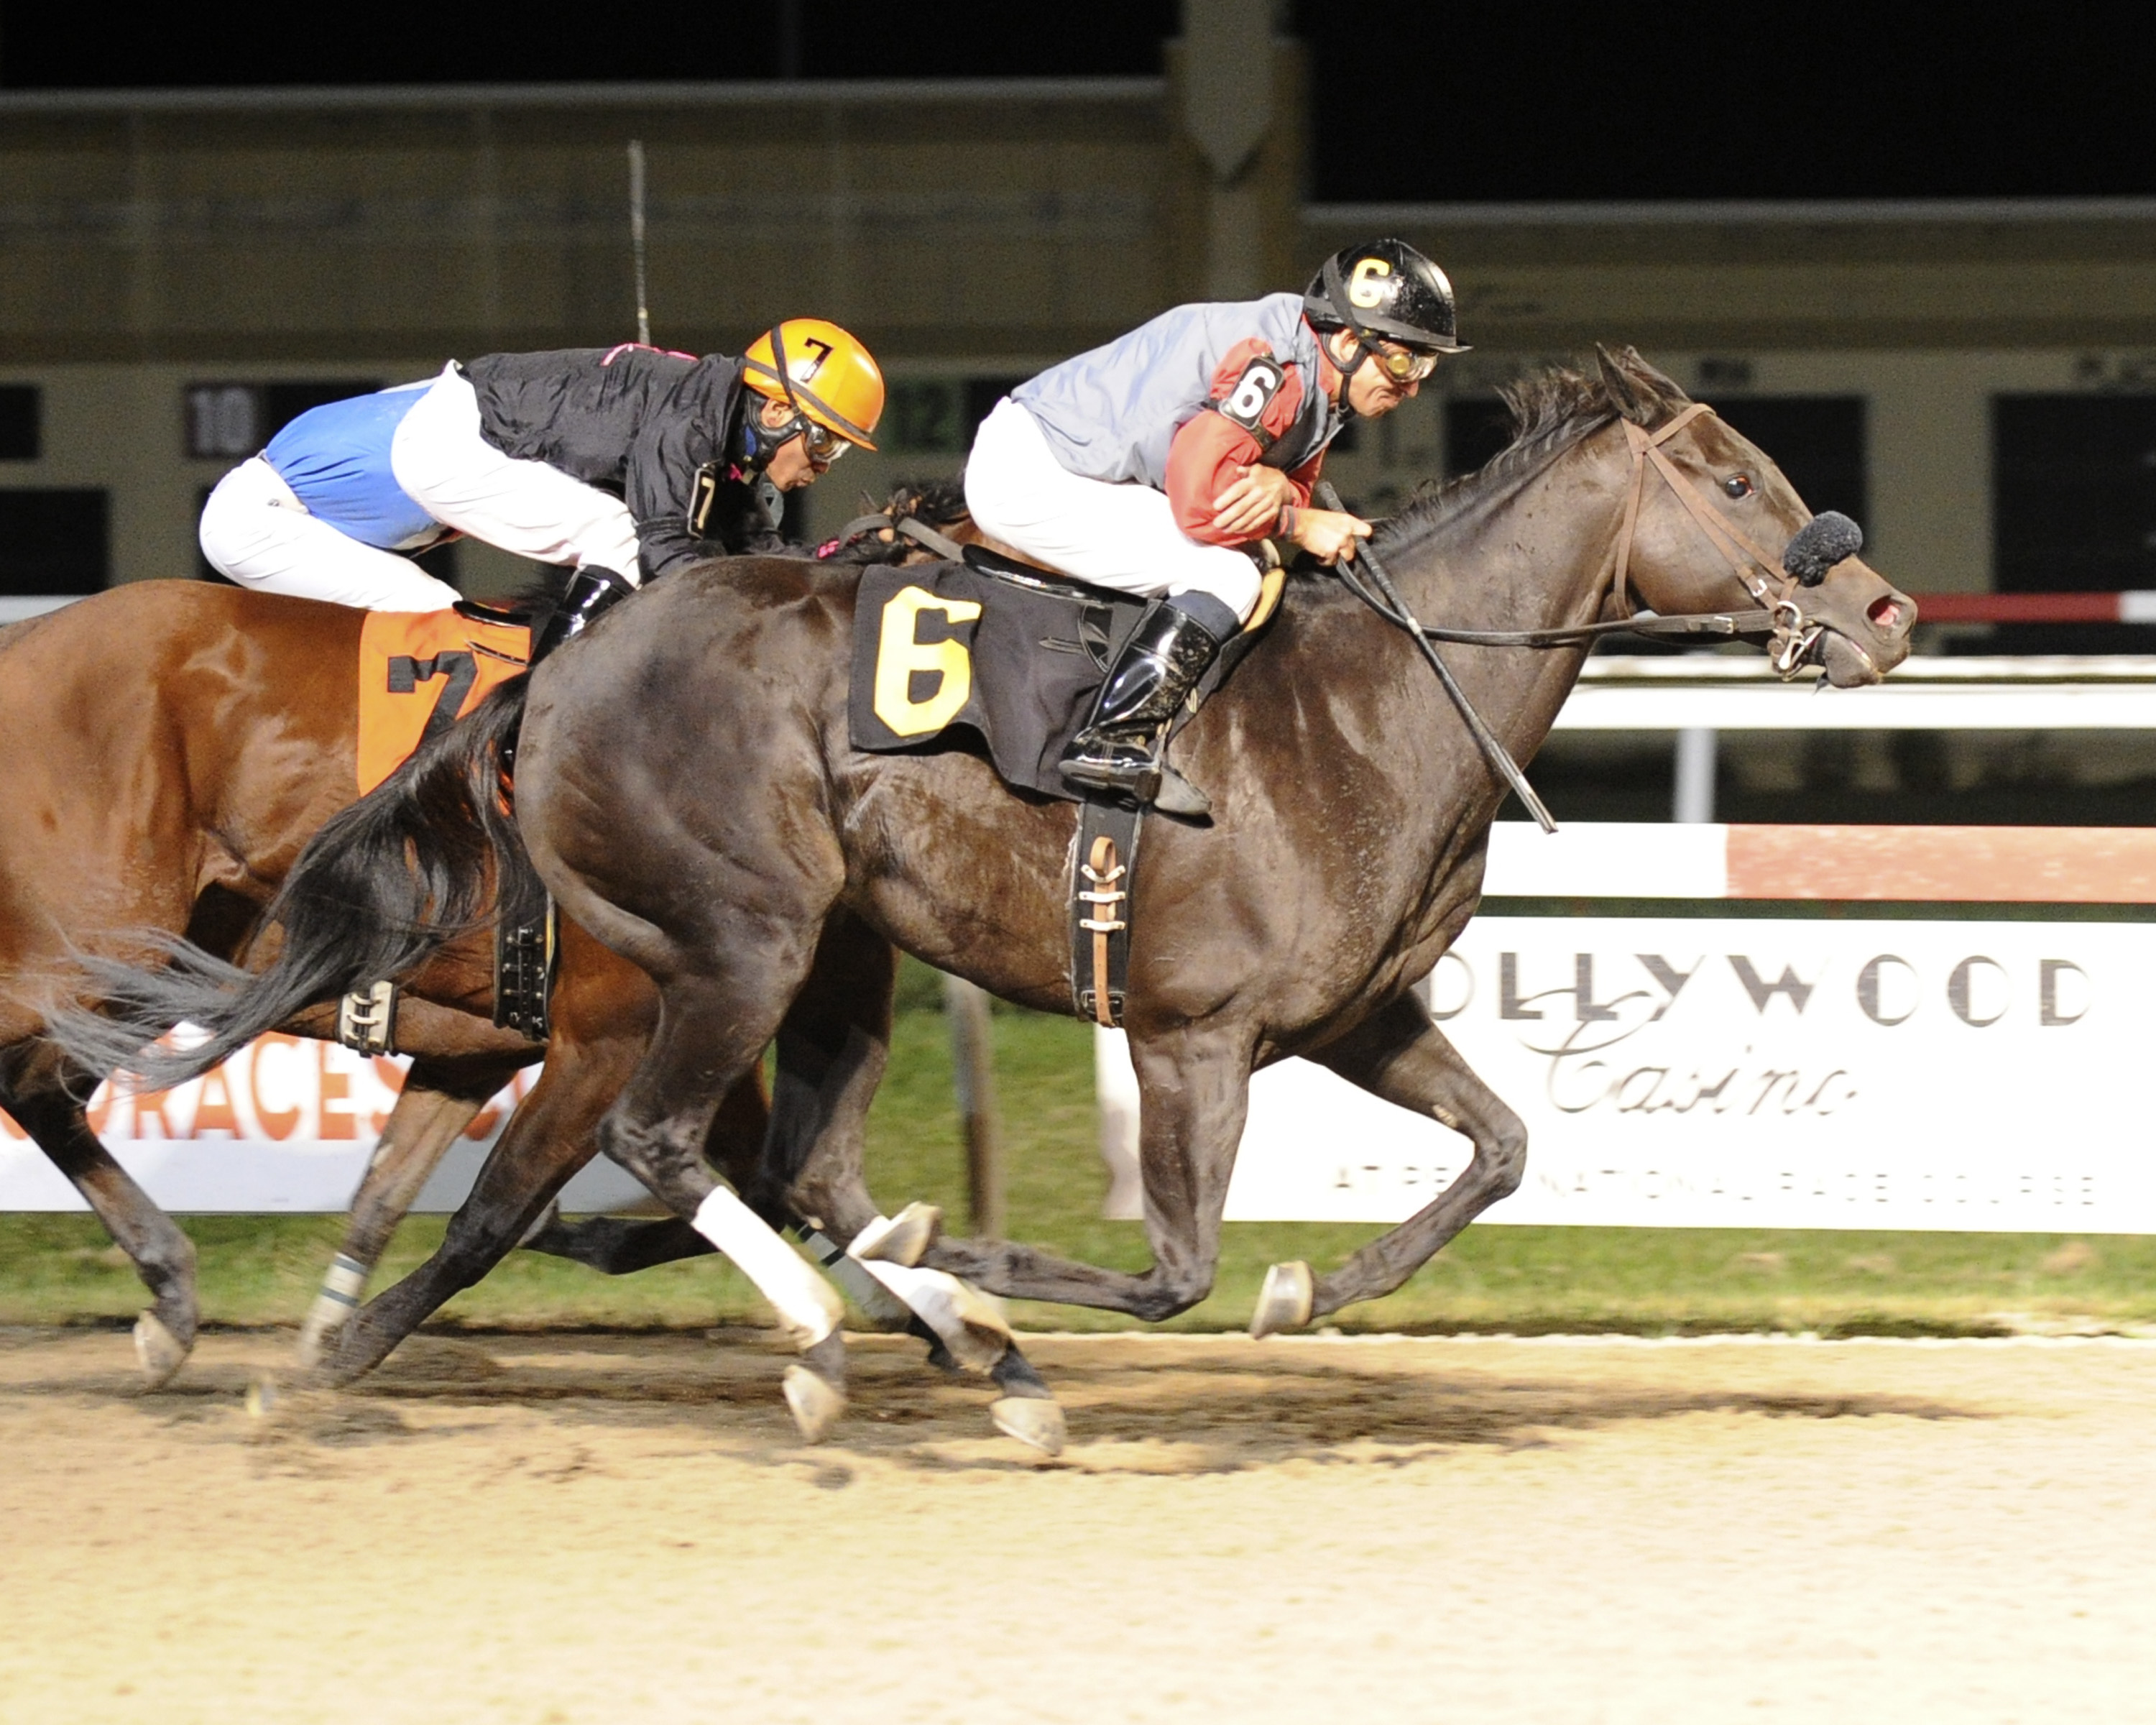 True Cost, bred by Anne Tucker, won a tight half length triumph over Deliver Me at Penn National in a $32,850 claiming event. Photo by B&D Photography.